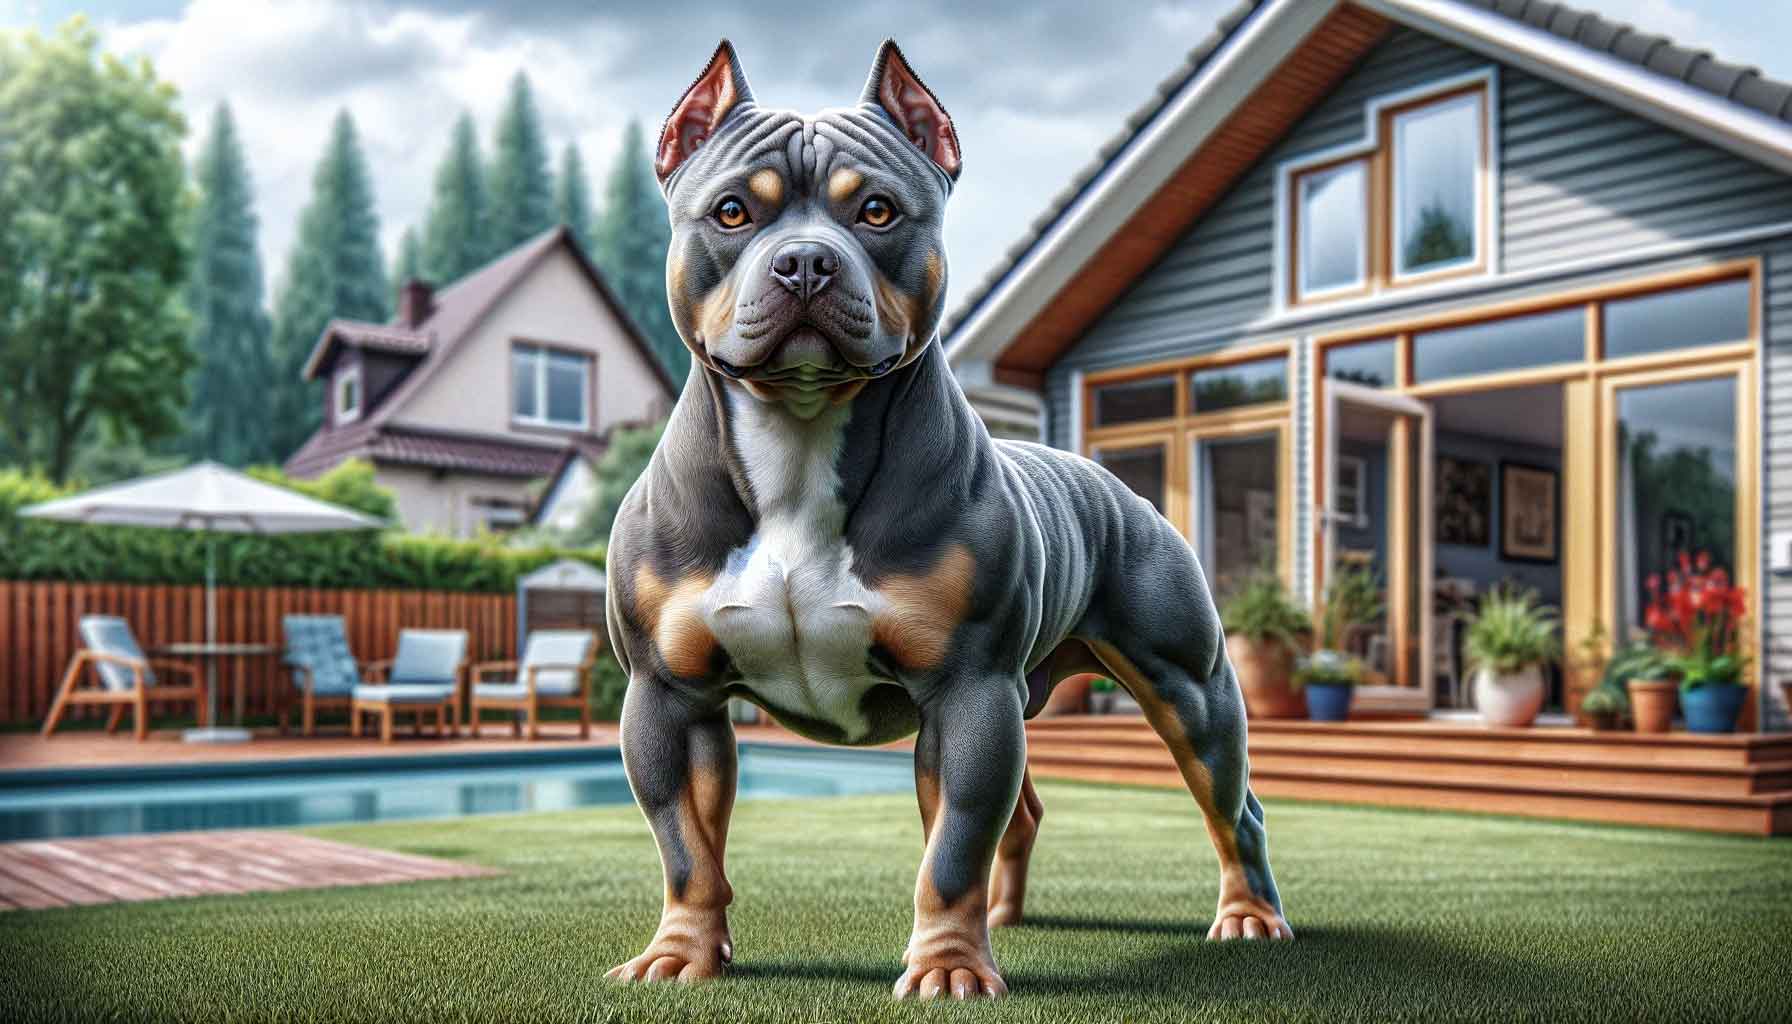 A digital painting of a robust and alert micro pit bully standing proudly in a family backyard. The dog's muscular build and unique grey and tan coat colors are prominent, with its attentive eyes conveying intelligence and loyalty.